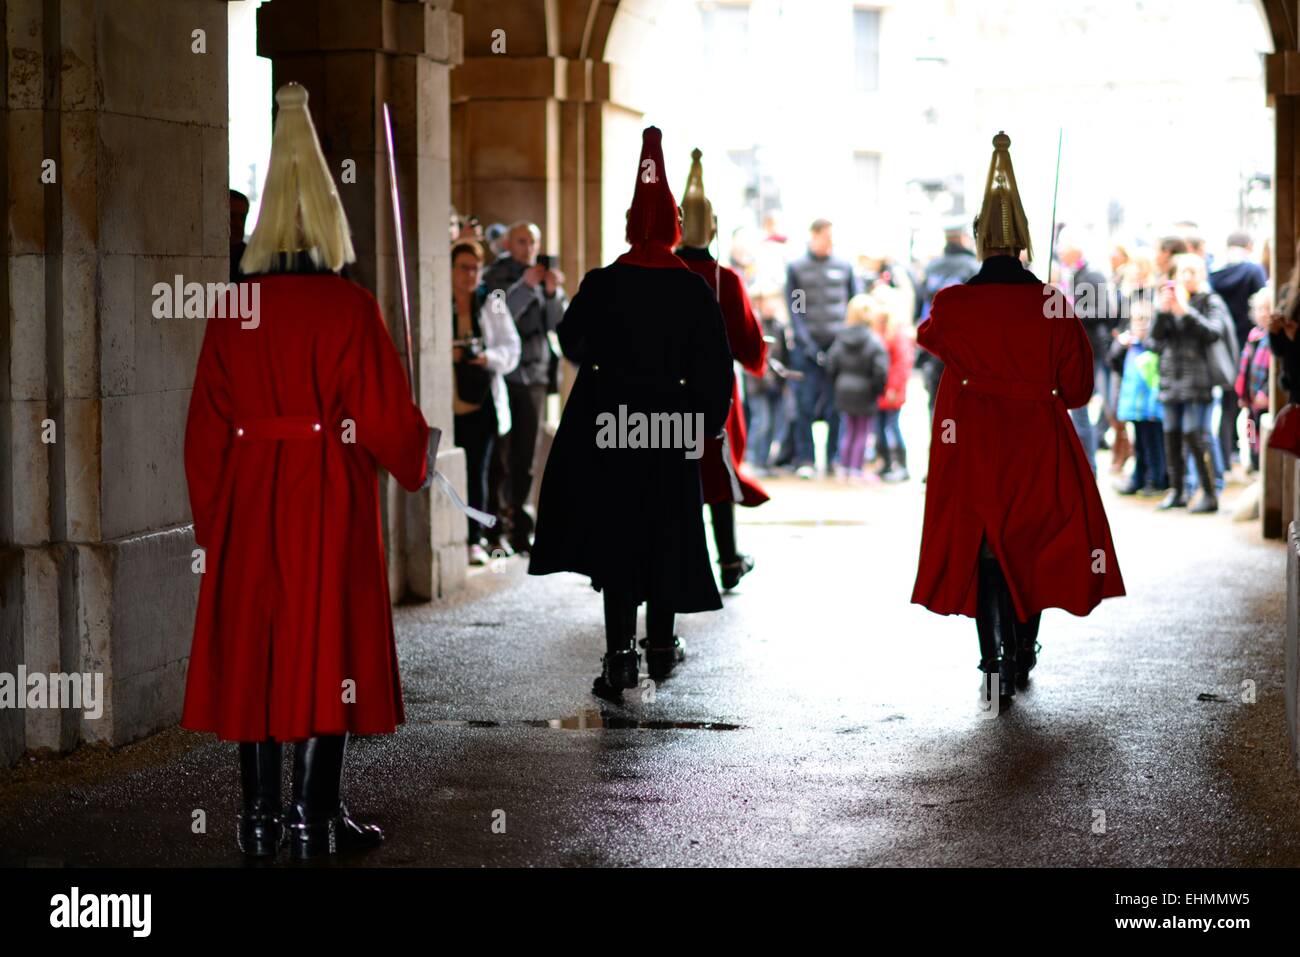 The Reds and Blues at Changing of the Guards at the Horse Guards Parade, Londra, Regno Unito. Foto Stock